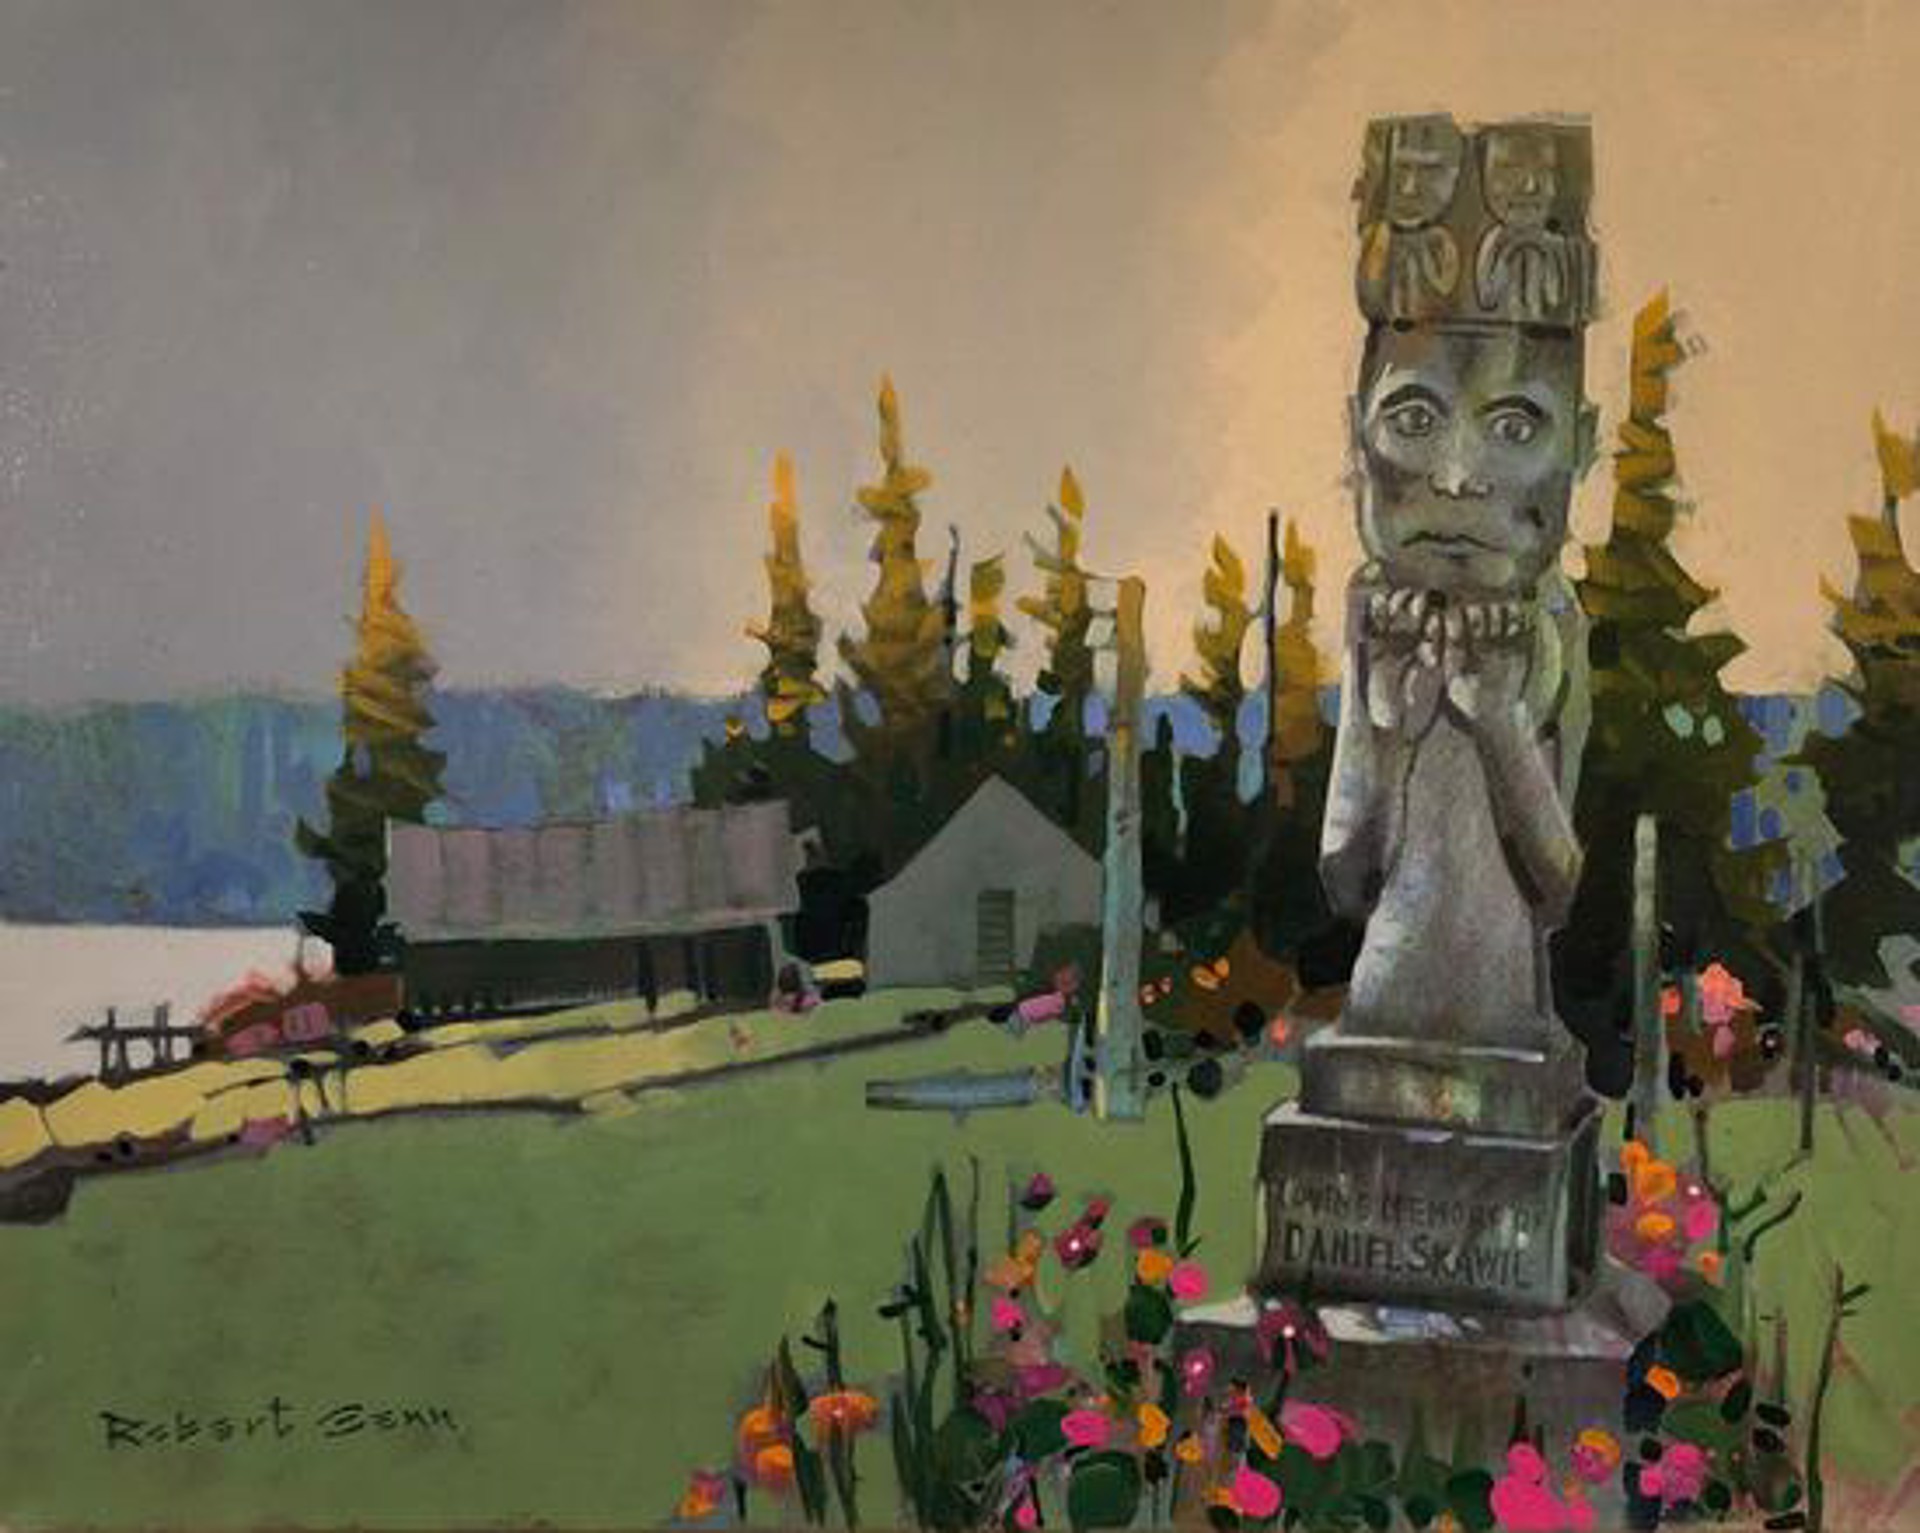 Silent Village and a Tribute to Daniel by Robert Genn (1936-2014)